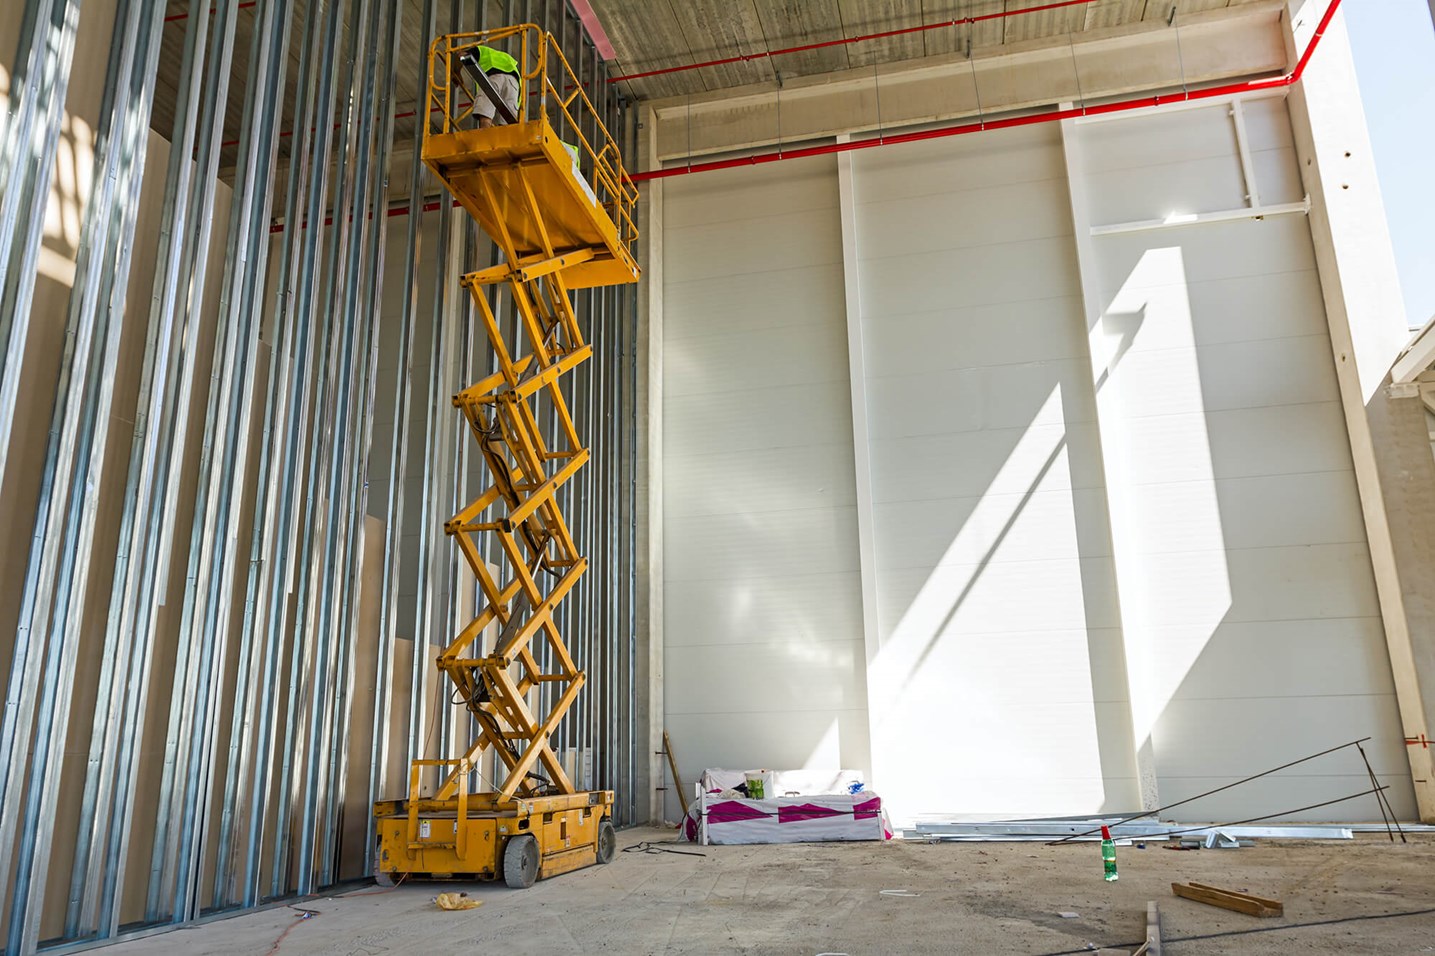 Fall prevention: safety standards for working at heights